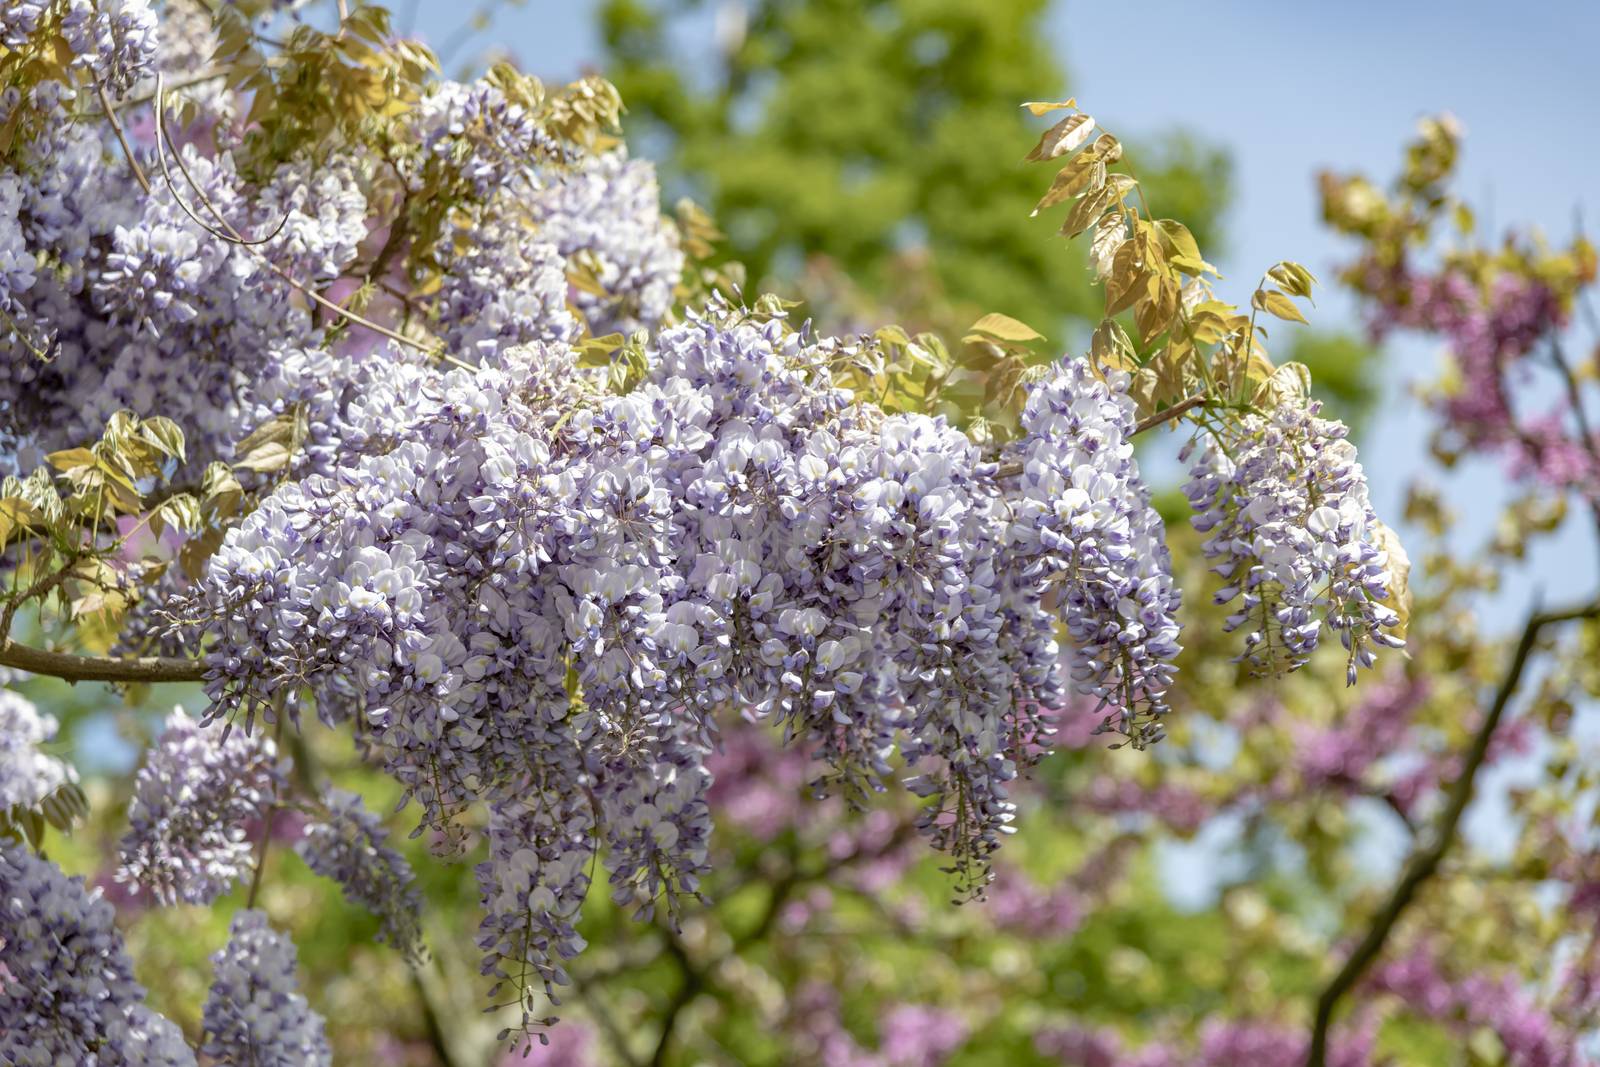 Purple Wisteria or glycine flowering plants in the legume family, Fabaceae (Leguminosae), that includes ten species of woody climbing bines that are native to China